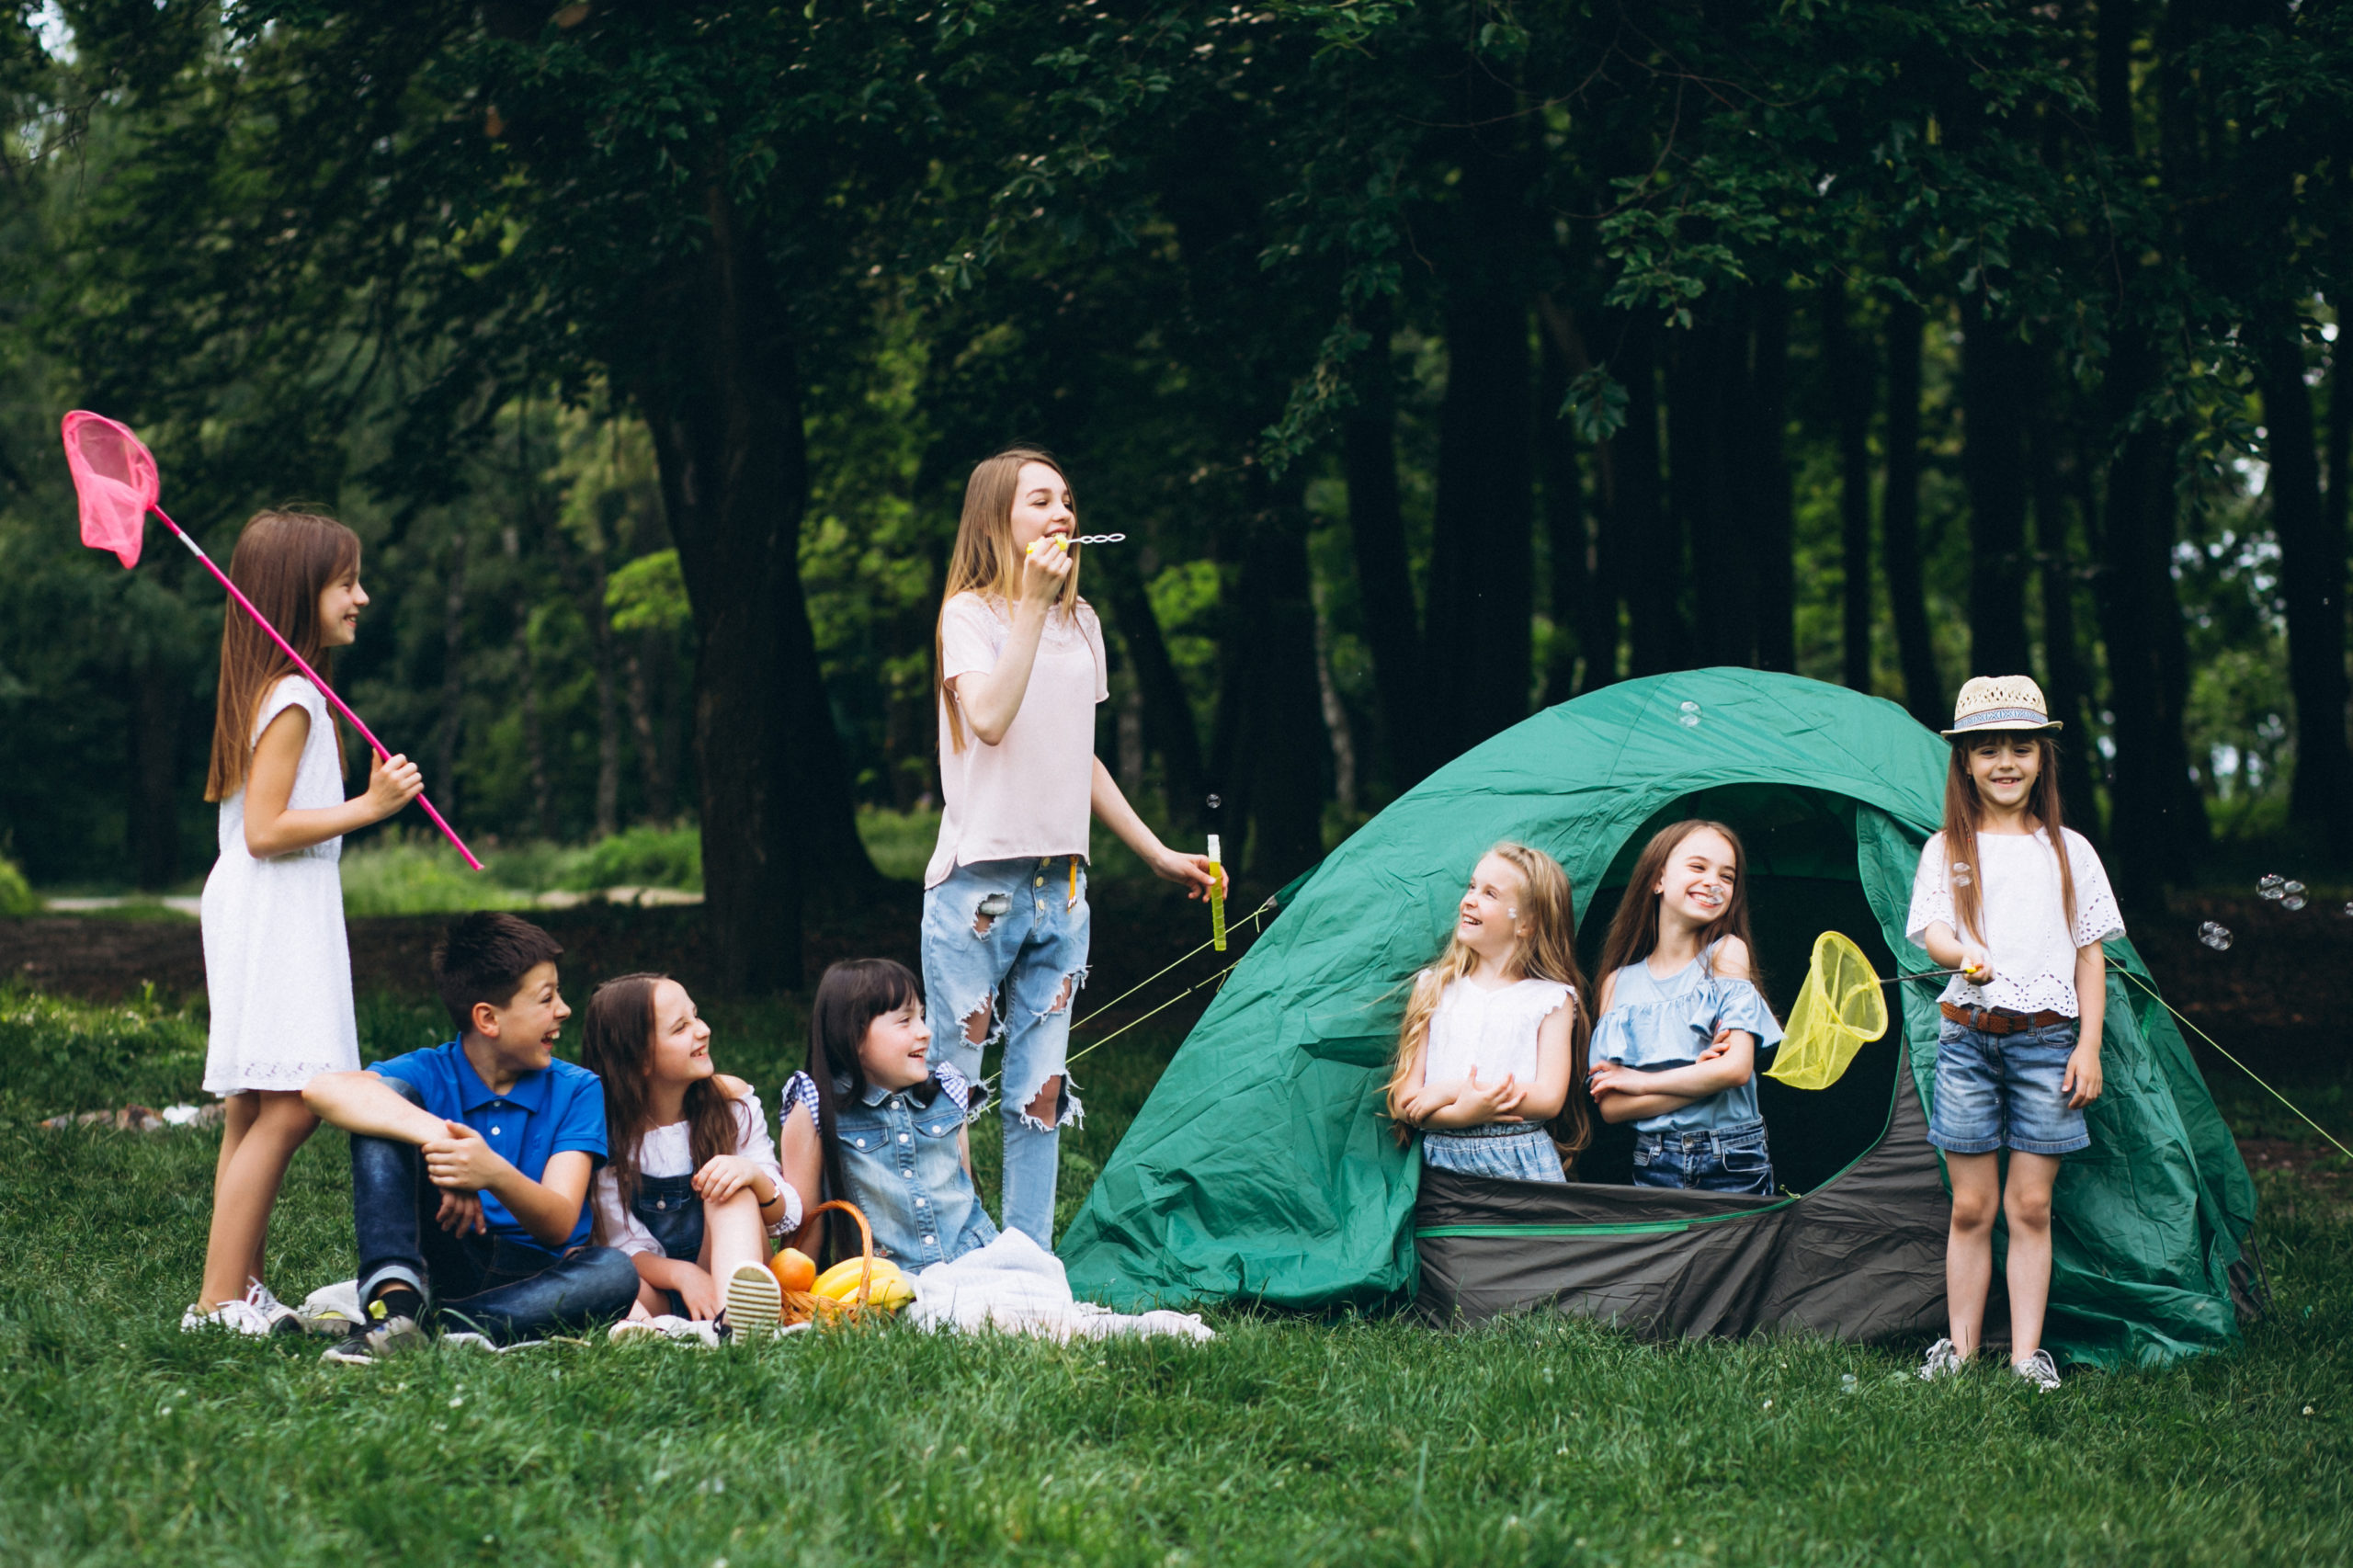 Group of teens camping in forest